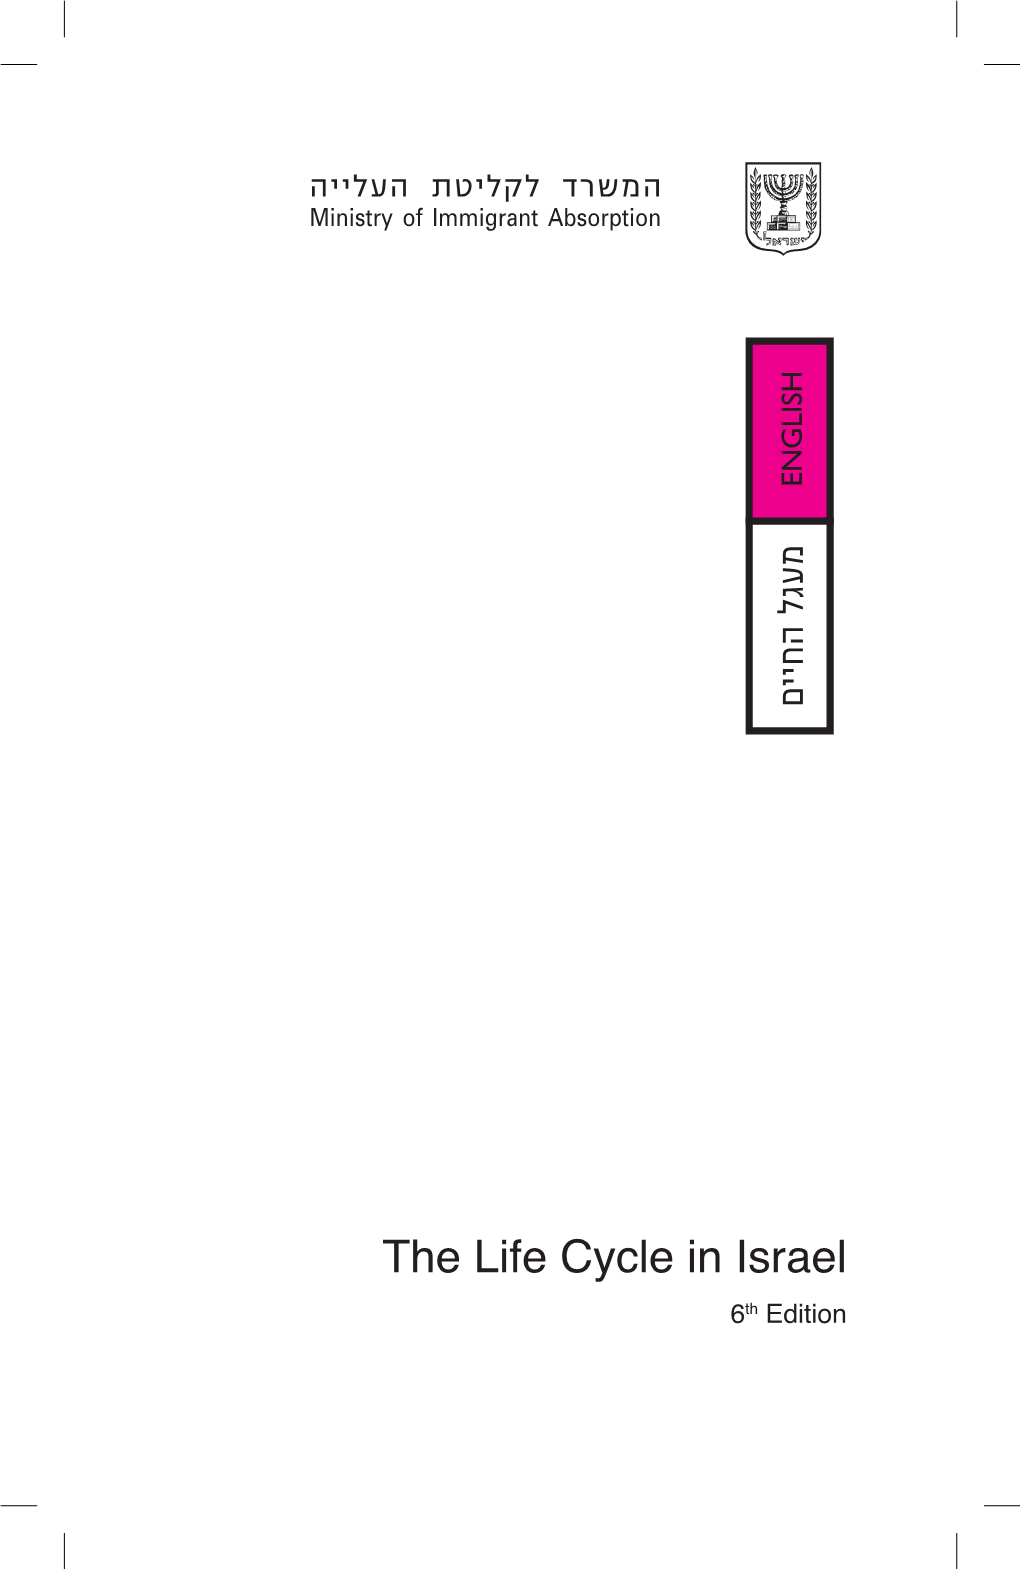 The Life Cycle in Israel 5